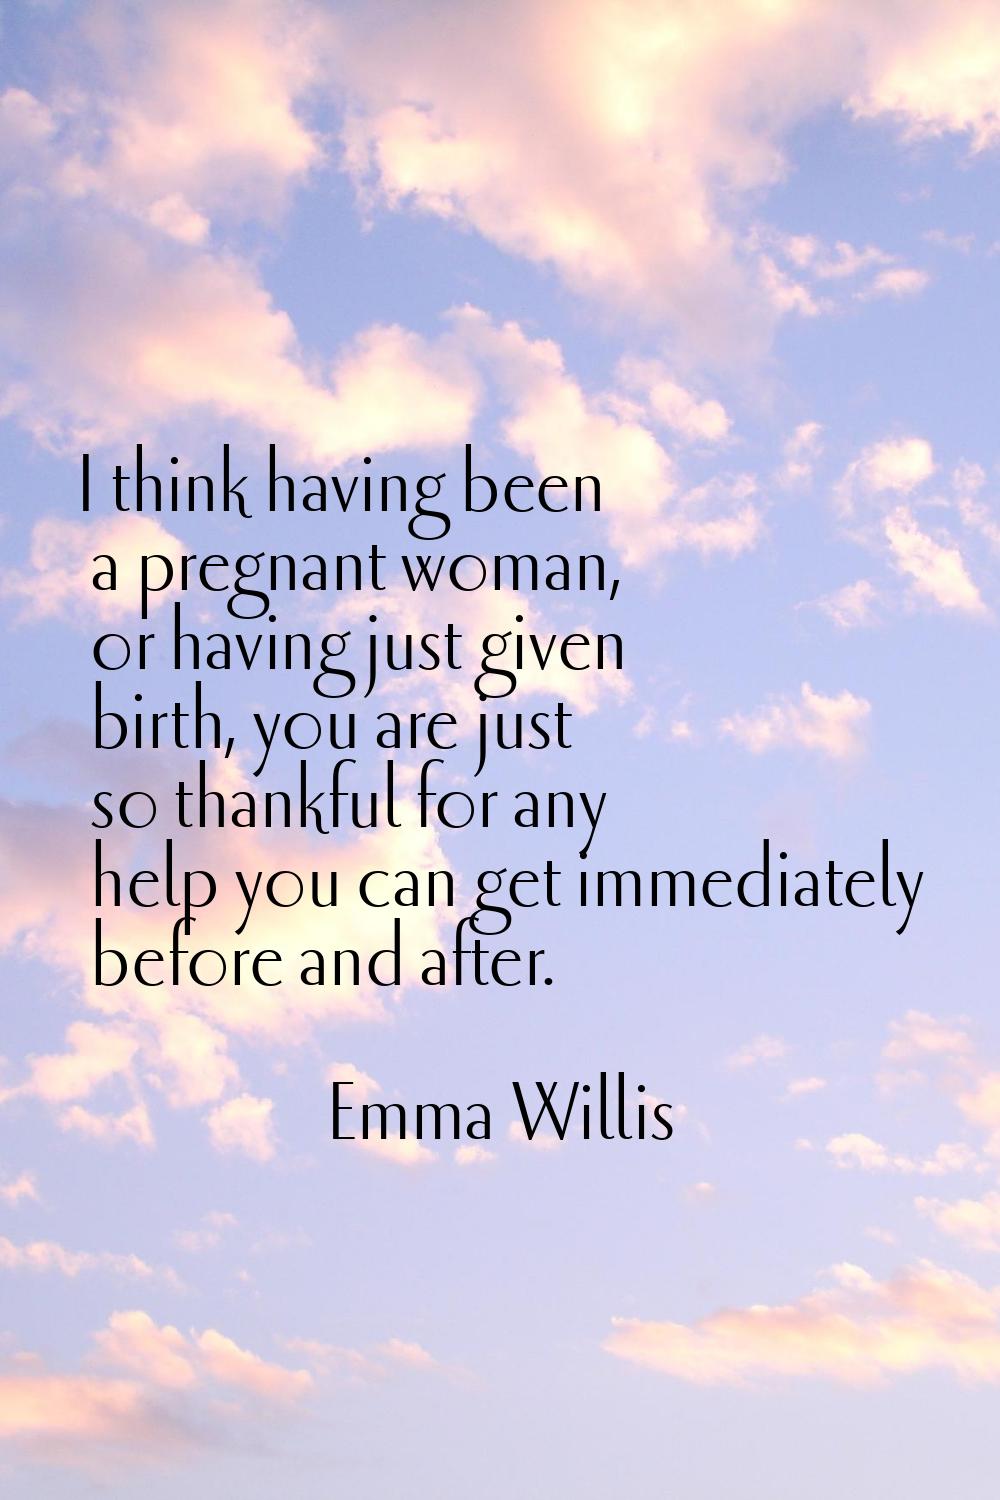 I think having been a pregnant woman, or having just given birth, you are just so thankful for any 